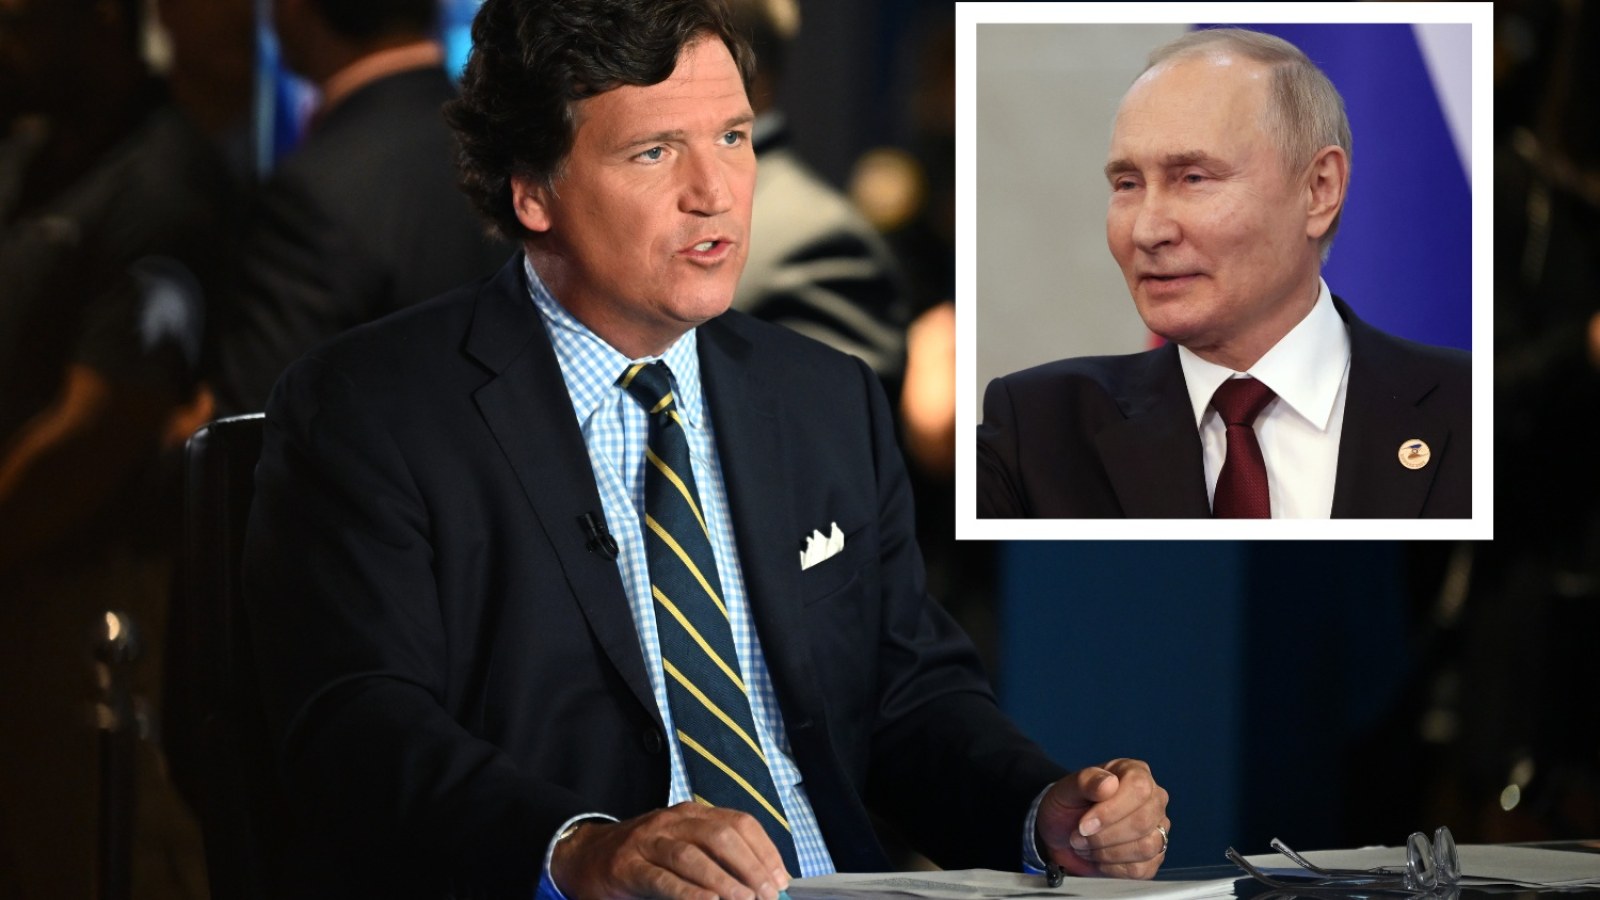 X Tops U.S. App Store Charts After Announcing Tucker Carlson’s Interview With Putin